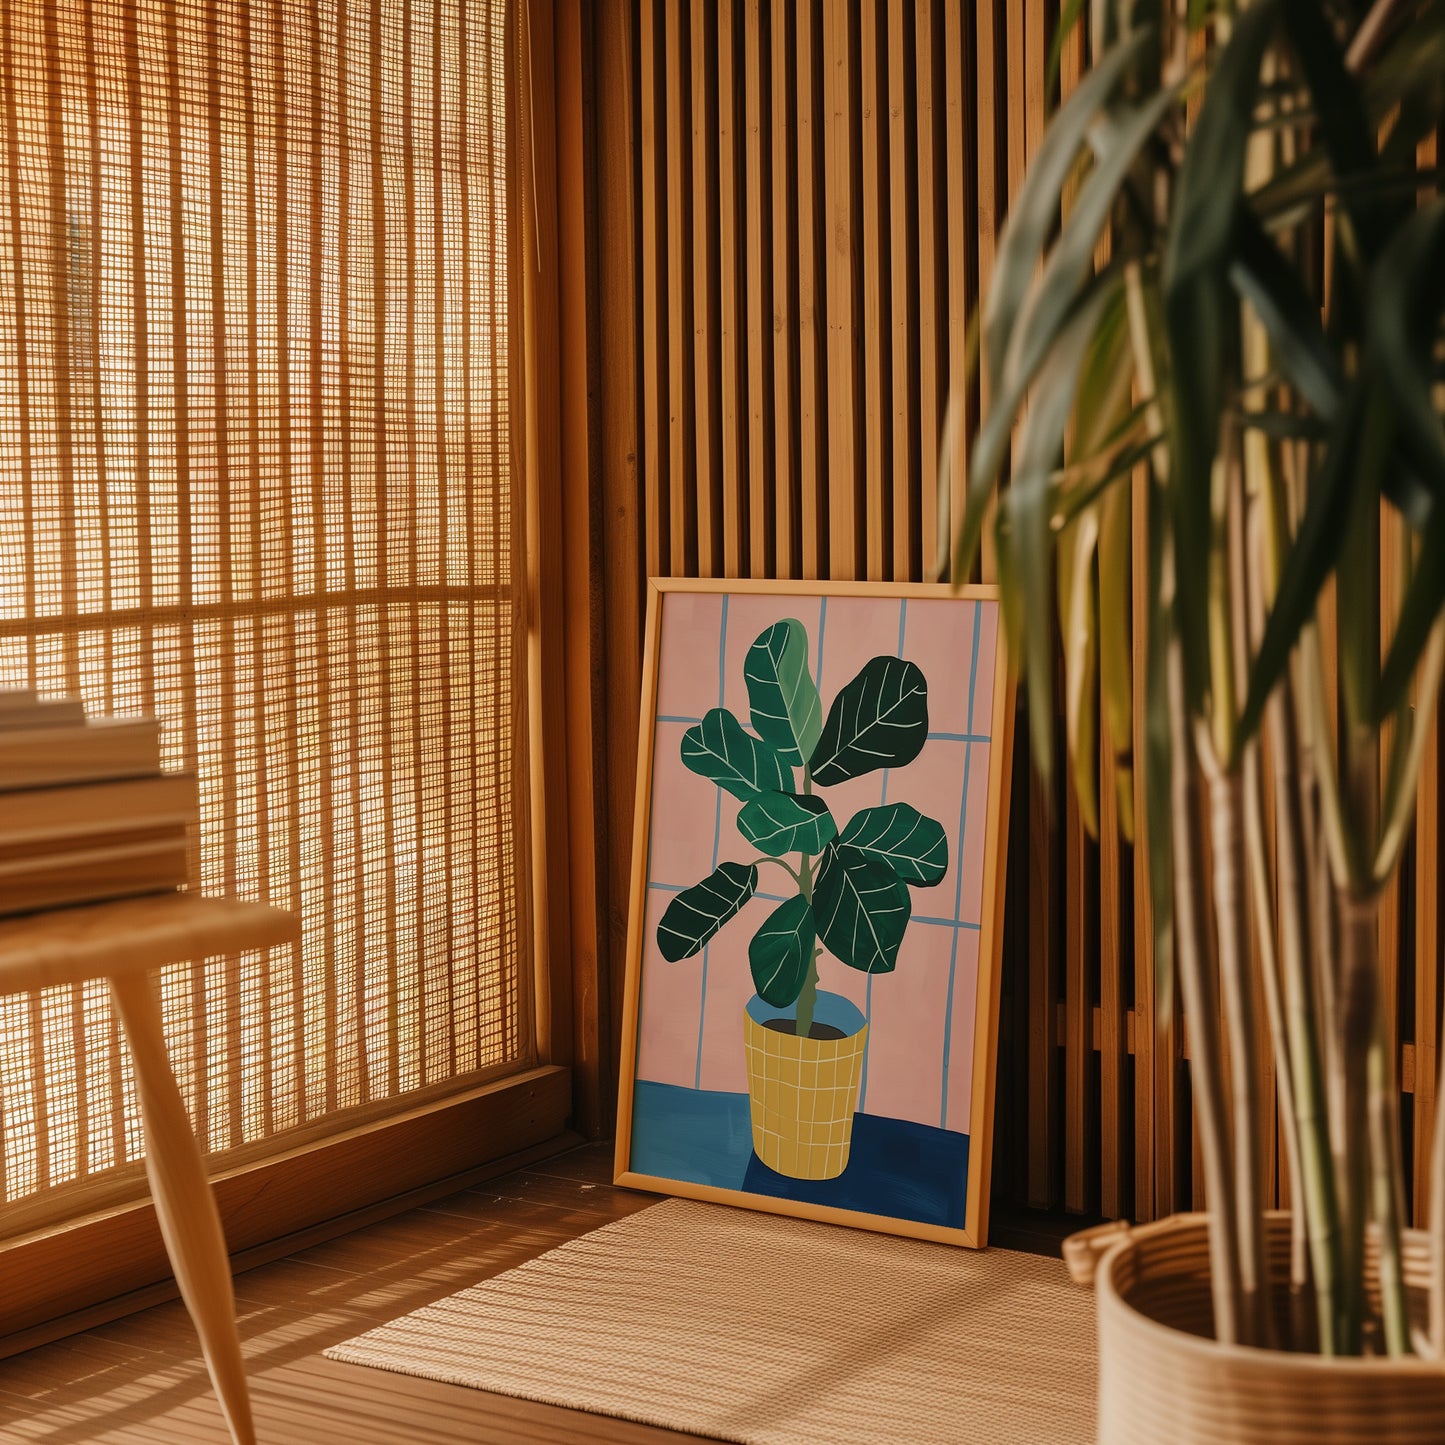 A painting of a plant in a pot placed on the floor next to a window with blinds.